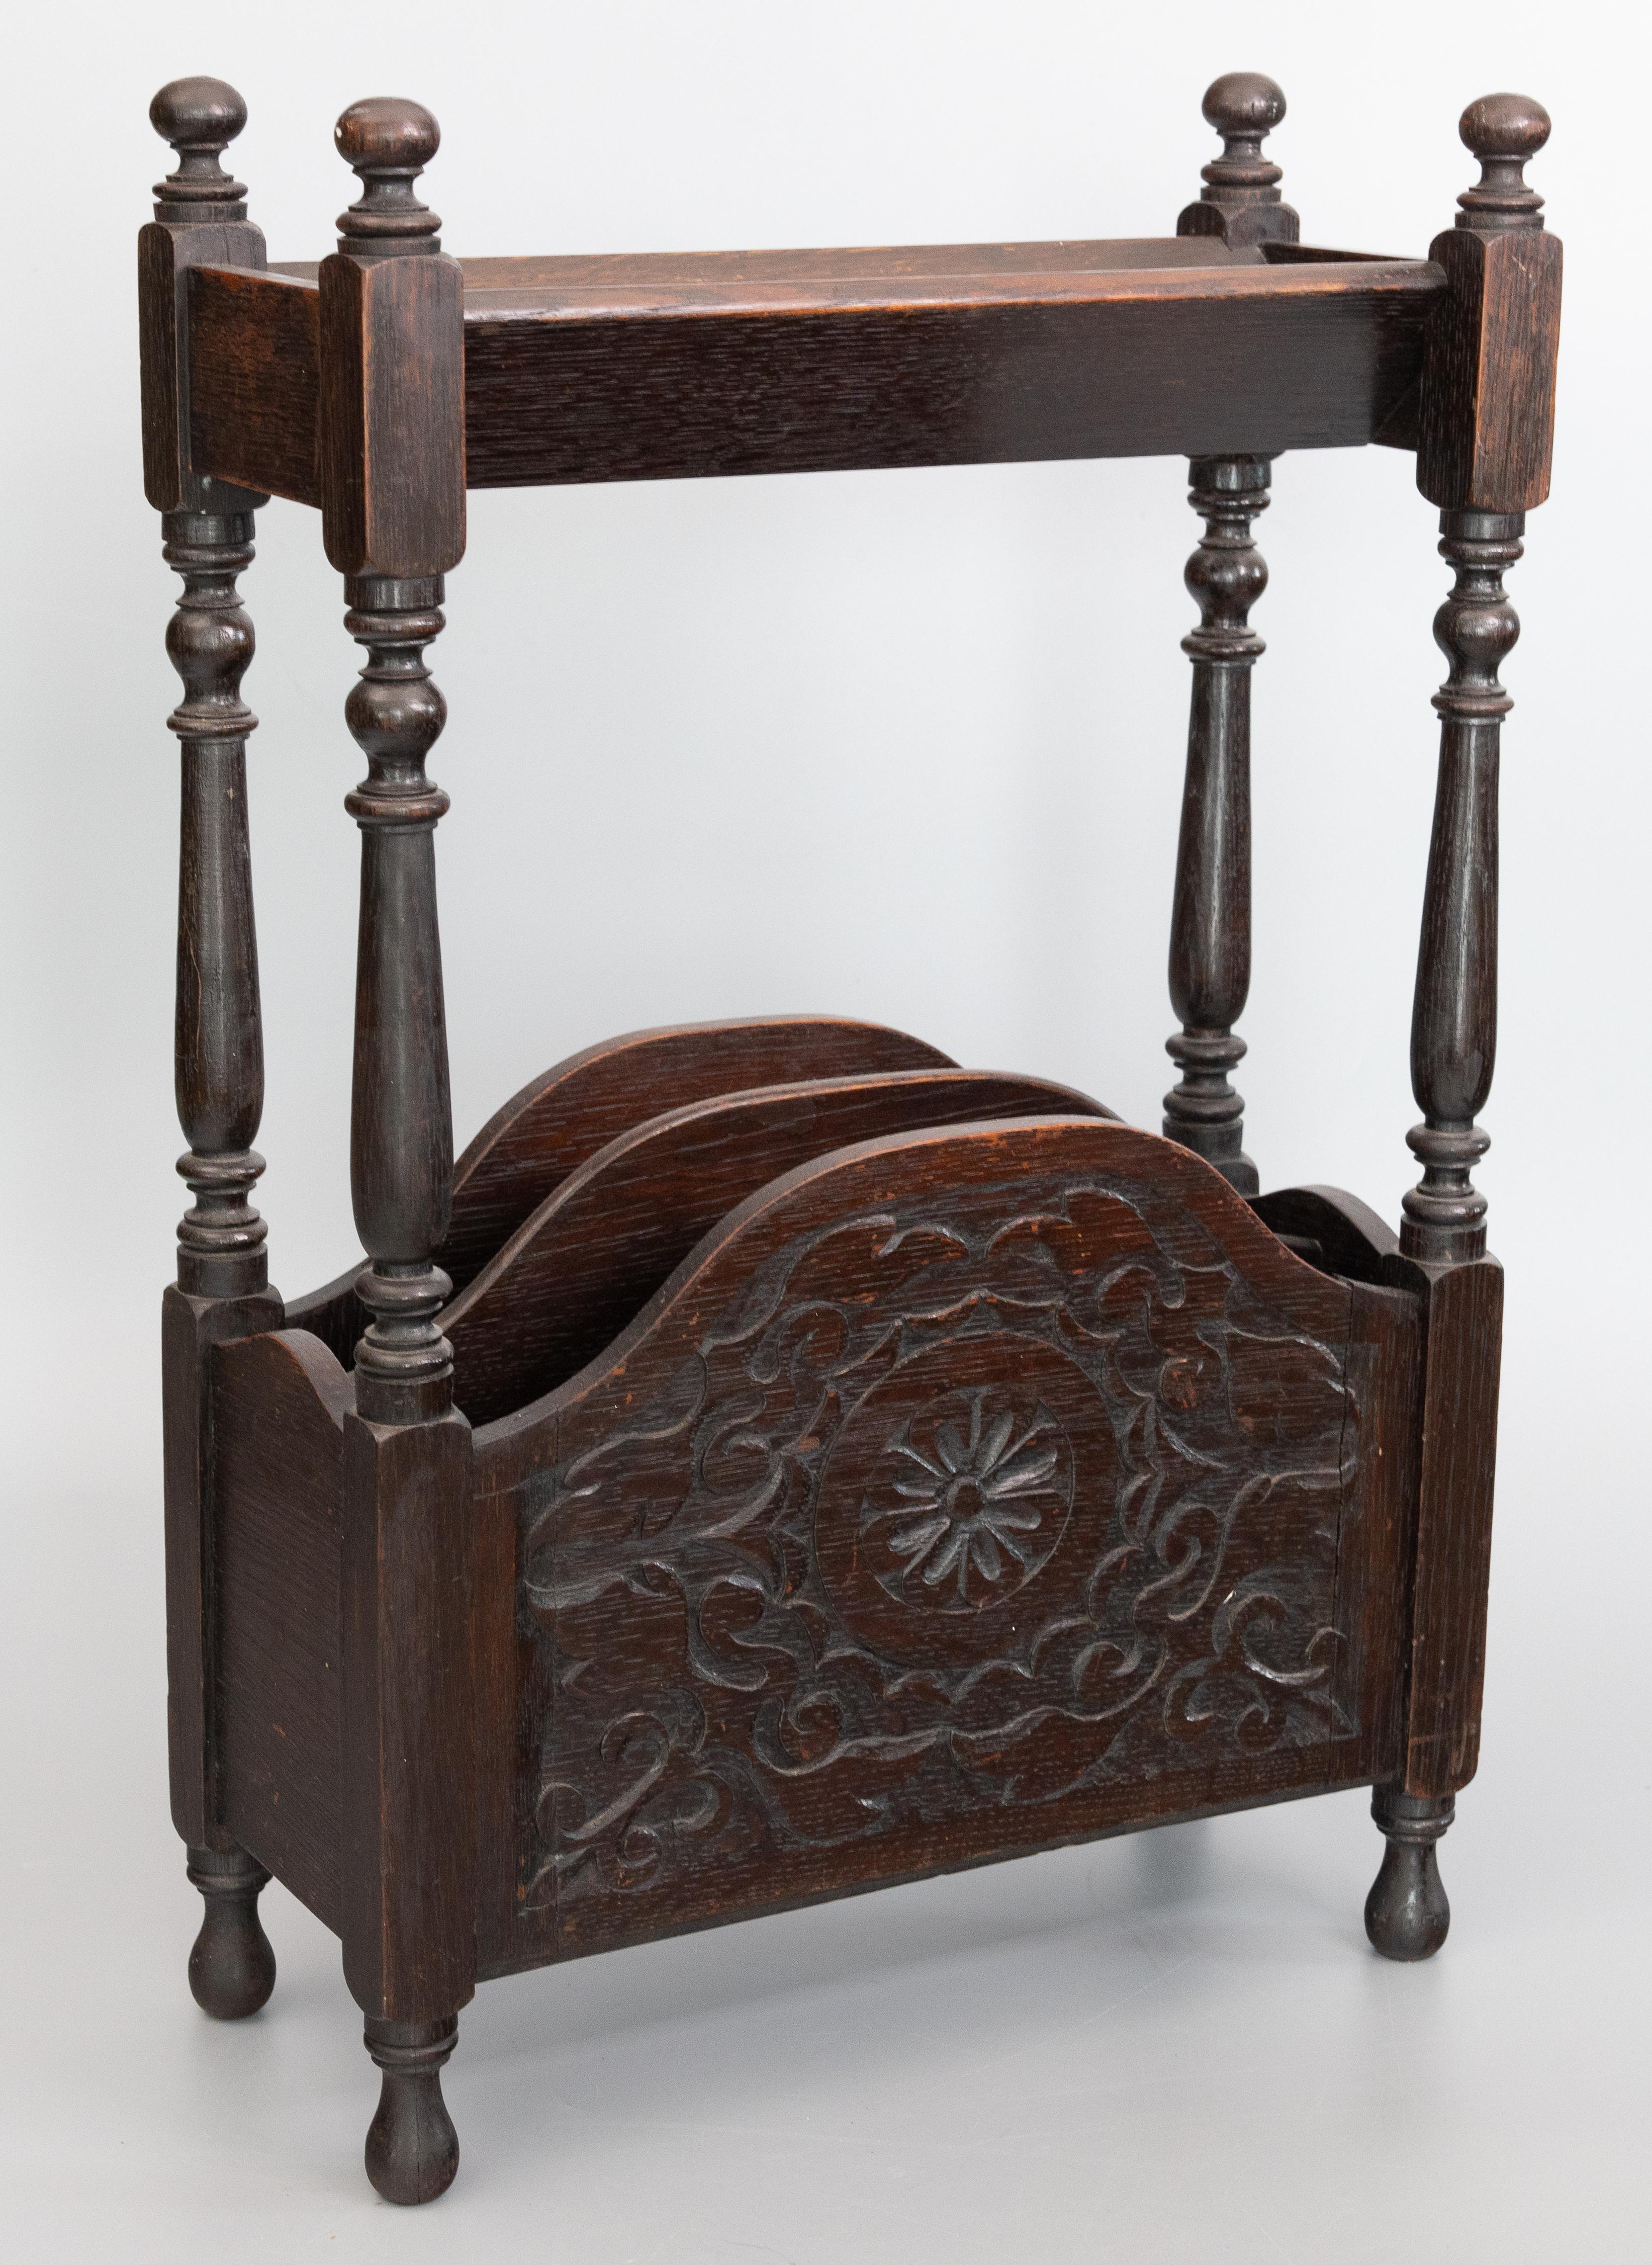 Antique English Carved Oak Library Book Trough and Magazine Rack Stand, c. 1910 For Sale 5